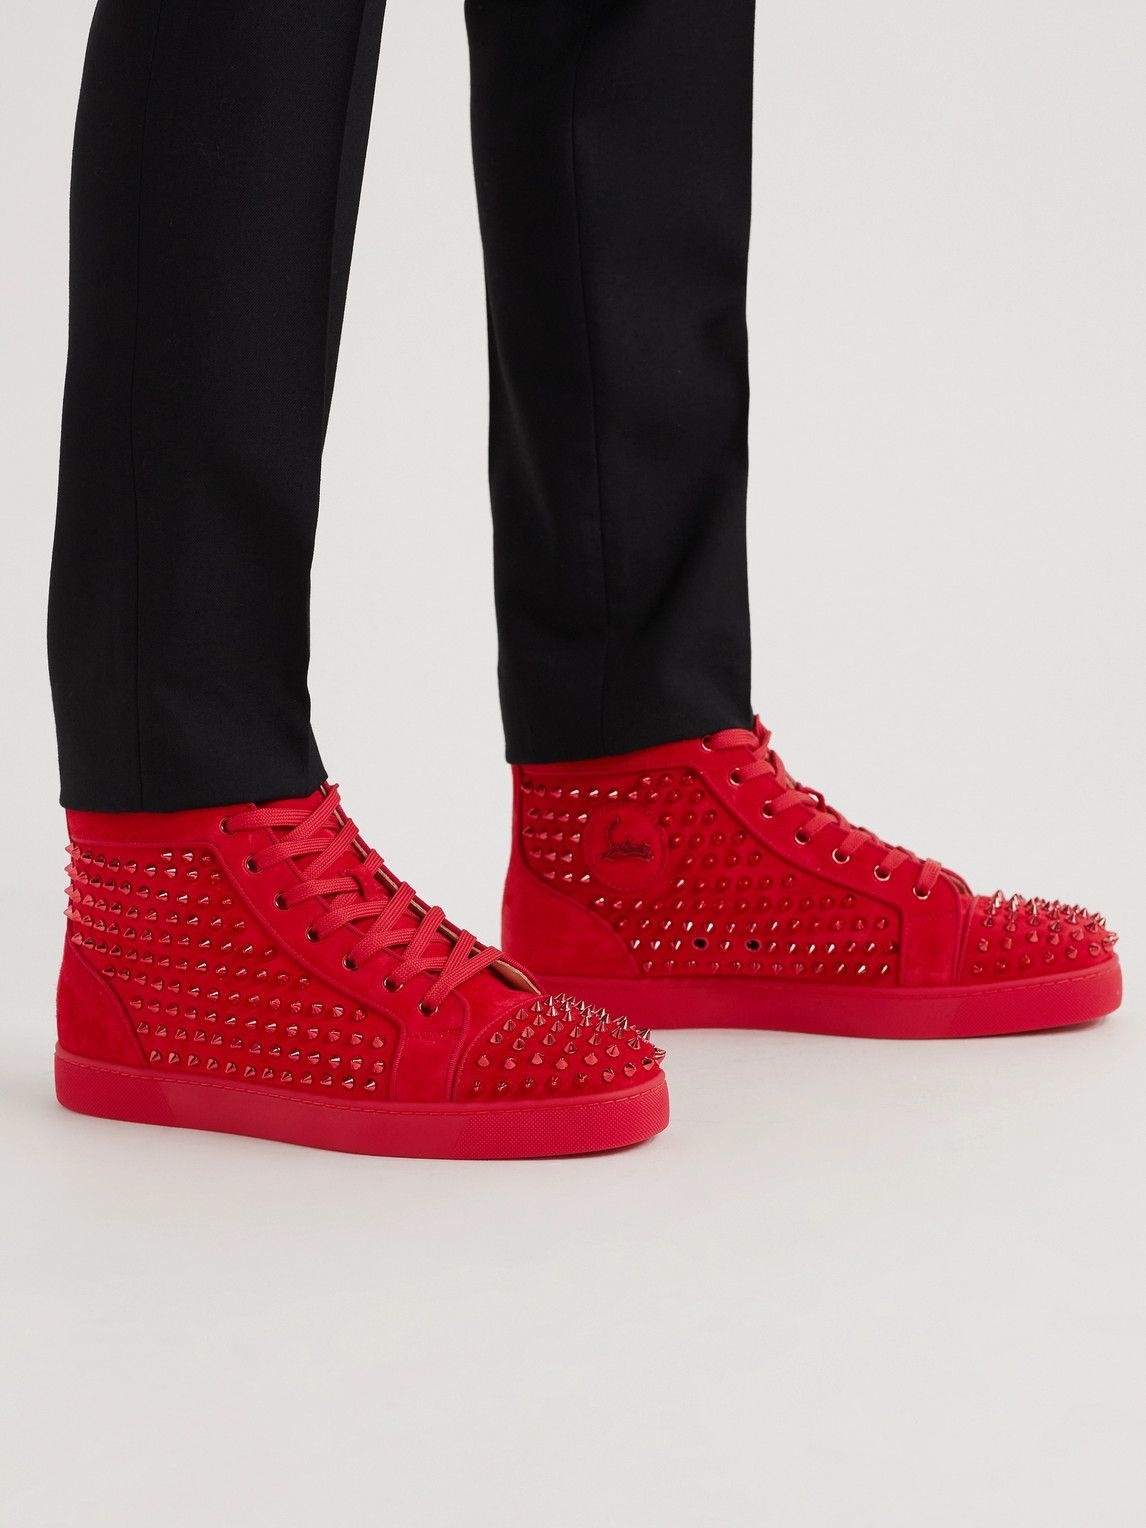 2023 Top Quality White Spikes Red Bottoms Sneakers Orlato Spikes Flat  Trainers High Top Men Women Red Bottoms Shoes Outdoor Casual Shoes From  Xuexiao01, $68.79